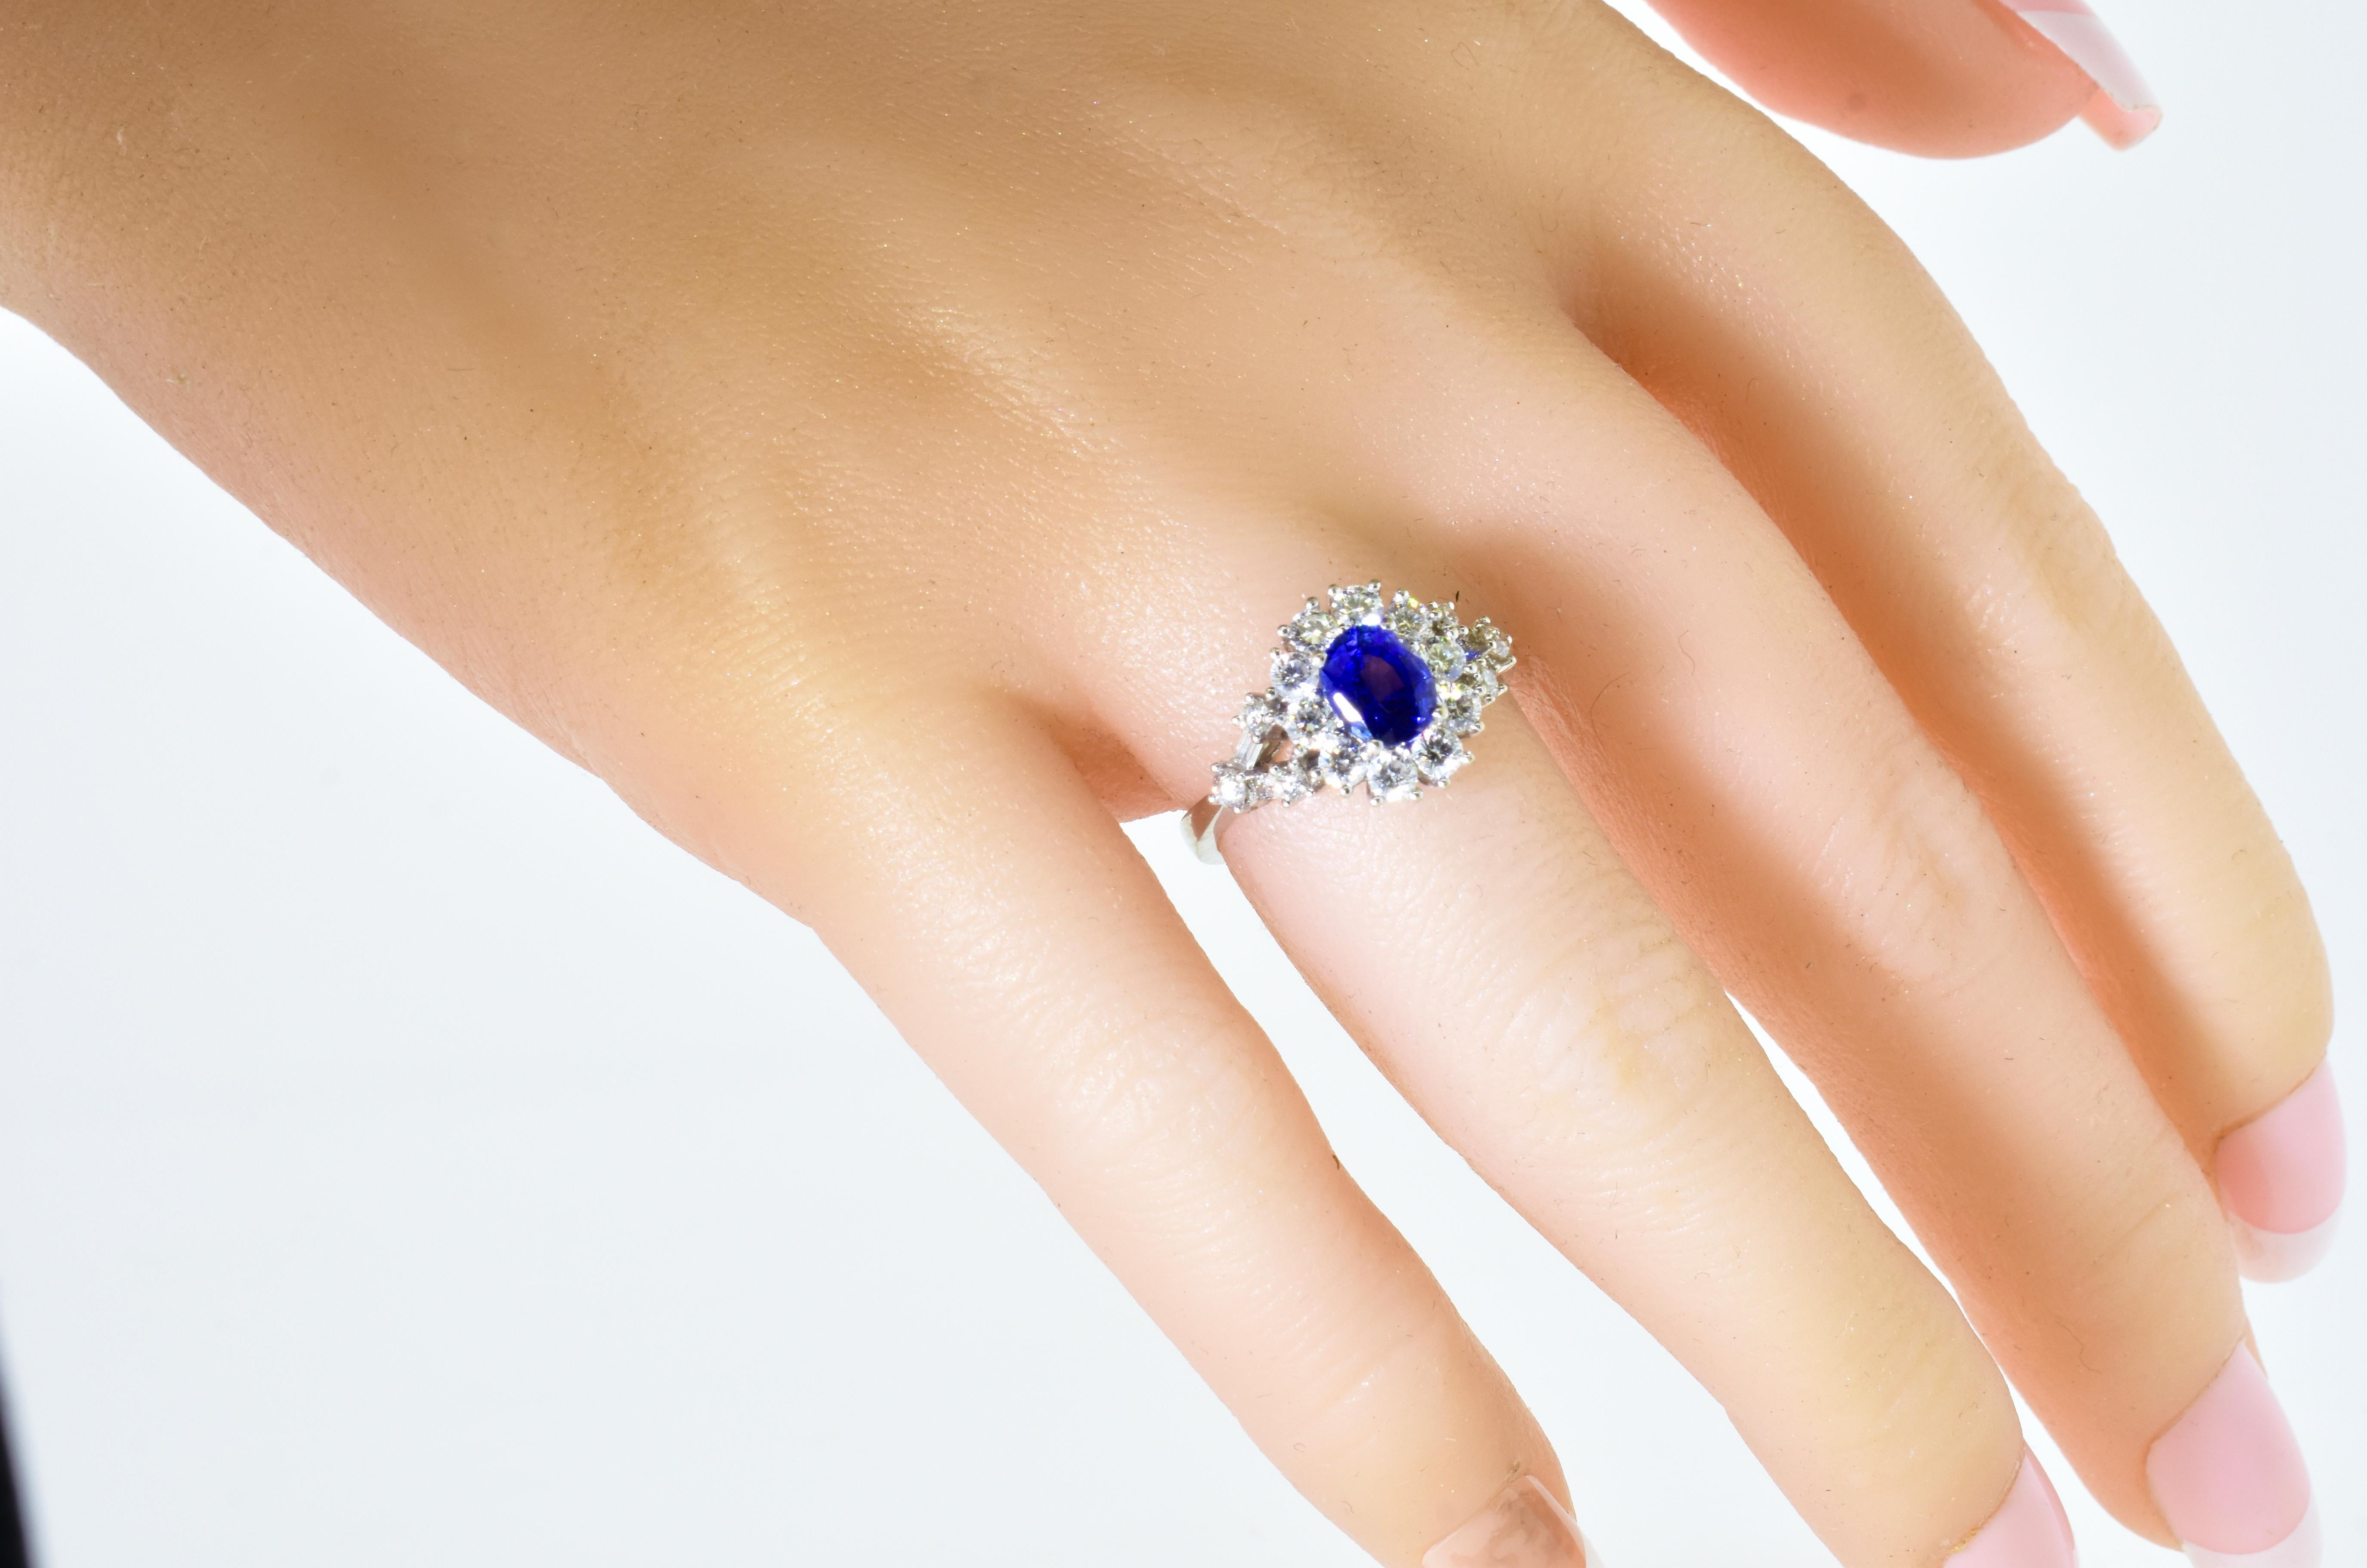 Sapphire and Diamond in a Fine Hand Made 18K White Gold Ring 1